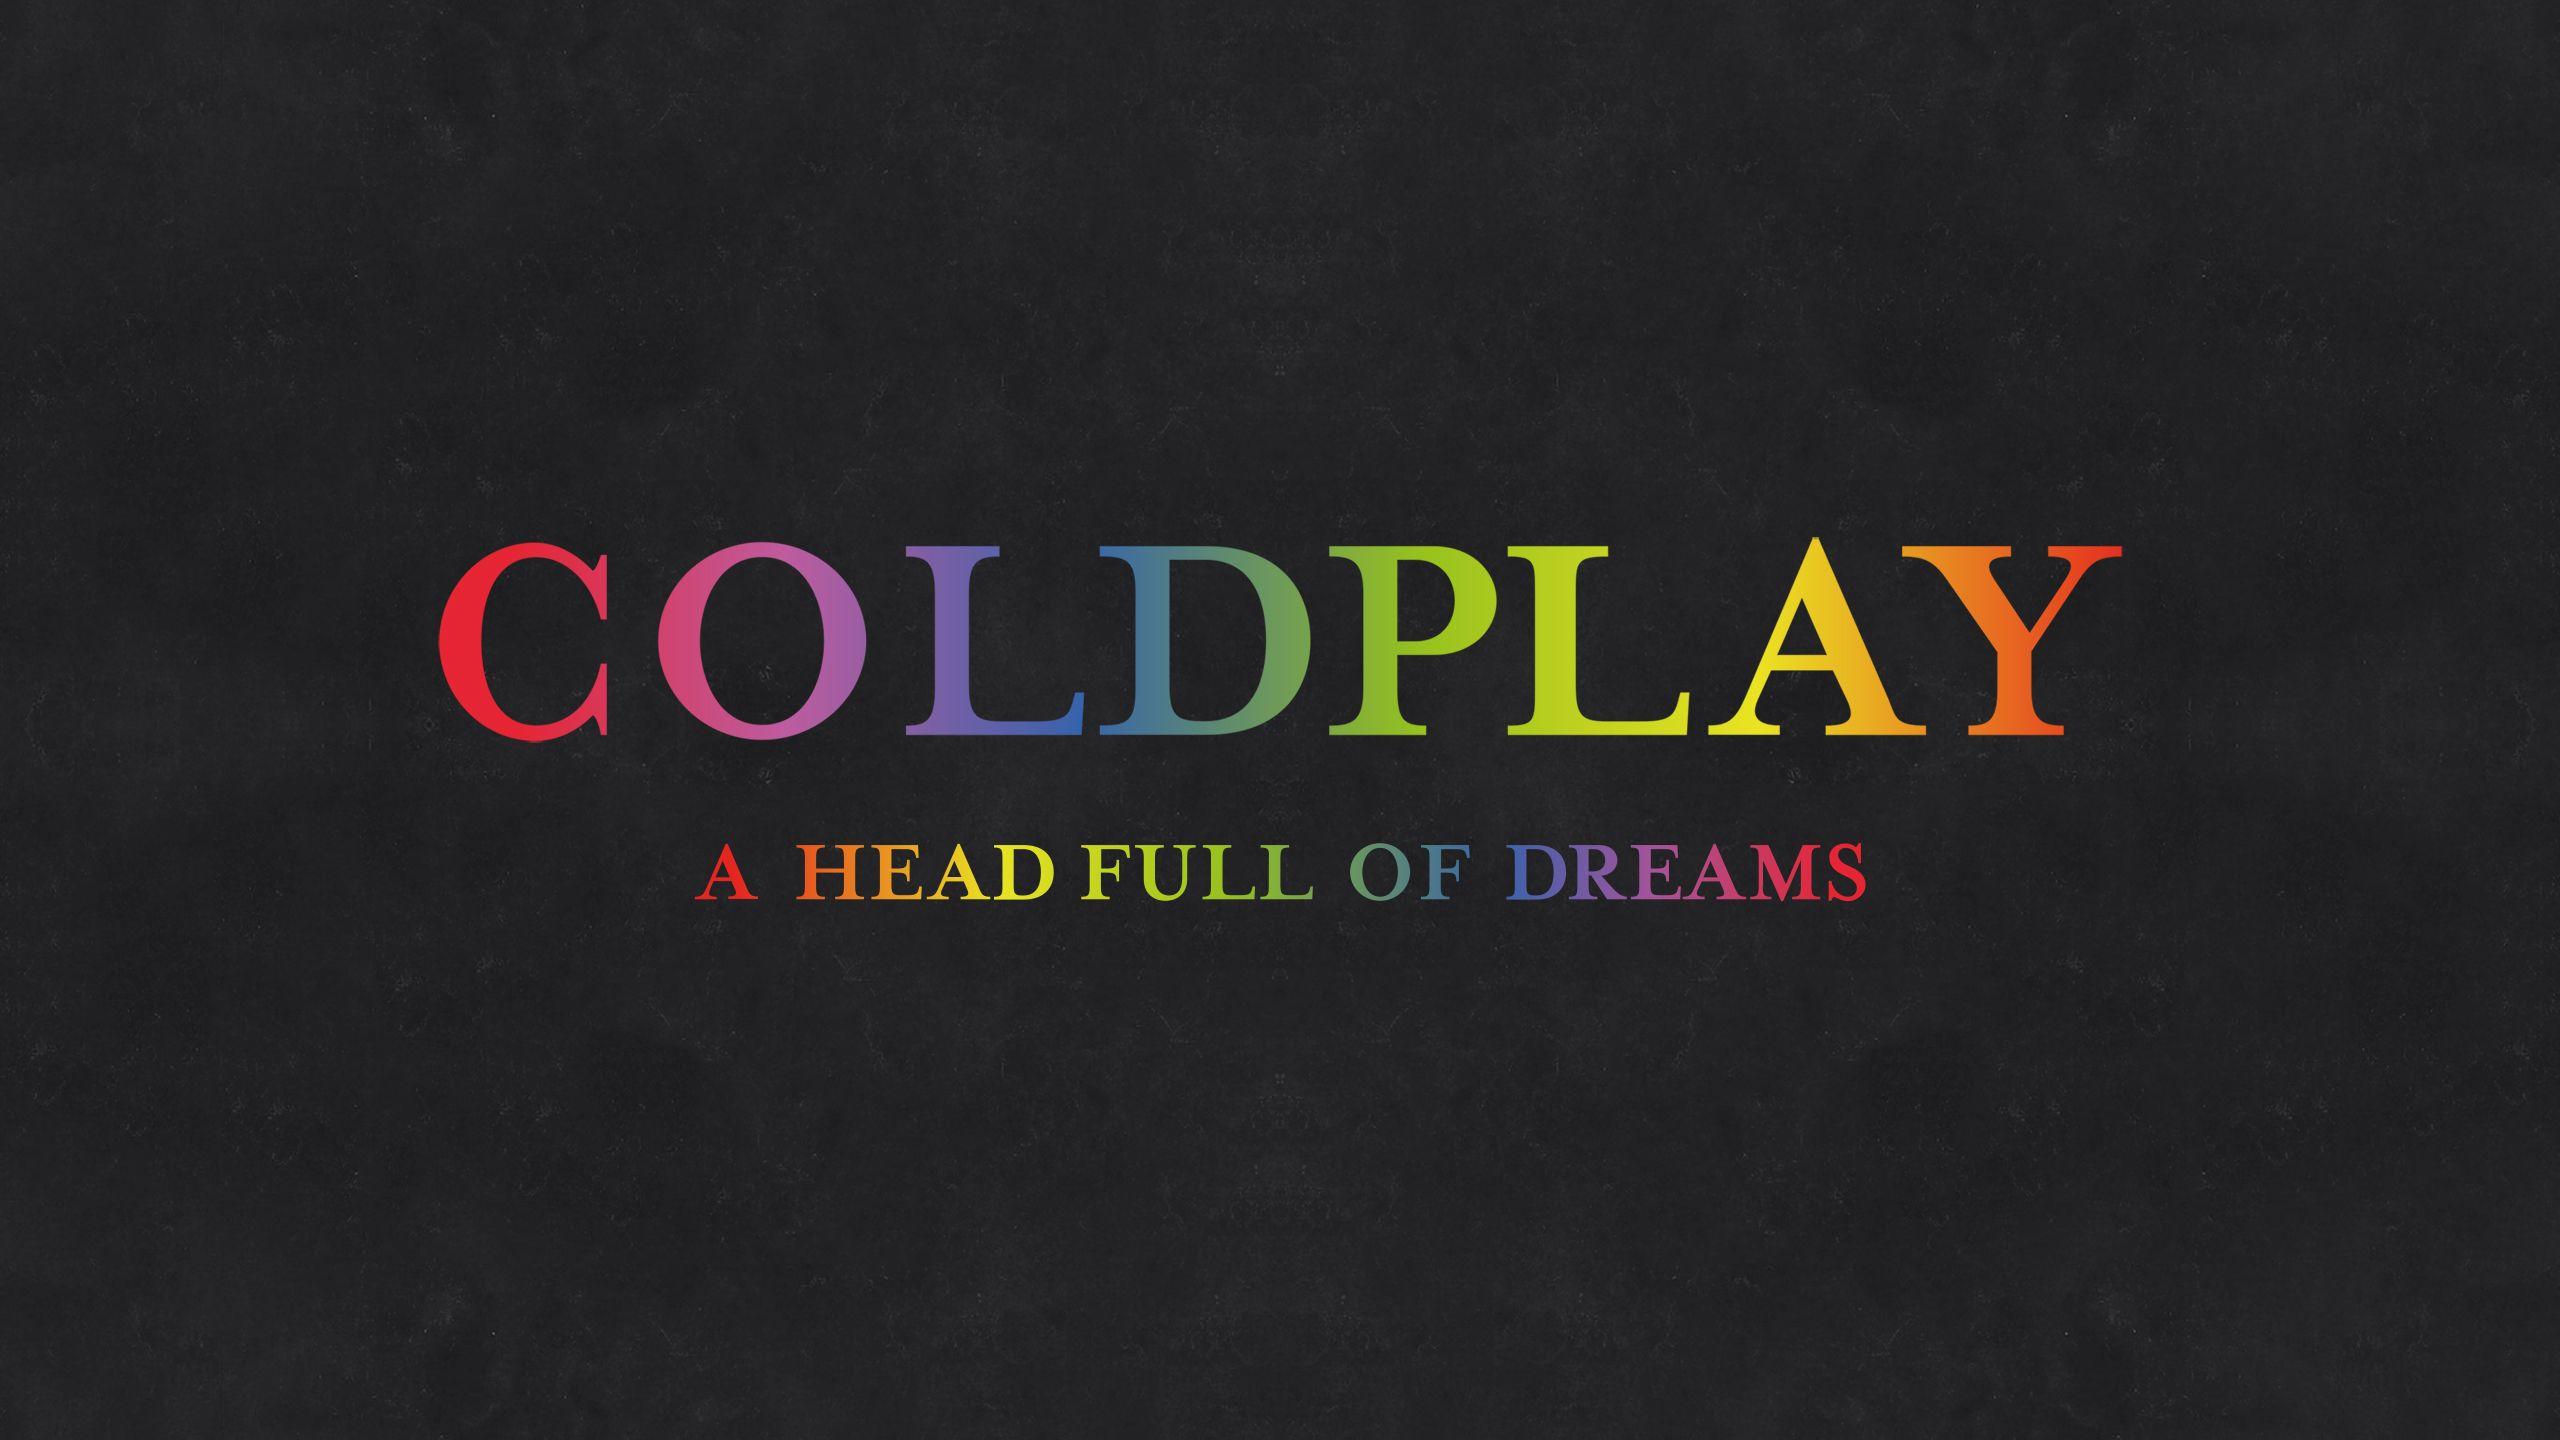 Coldplay Wallpaper HD Desktop Background Image and Picture. HD